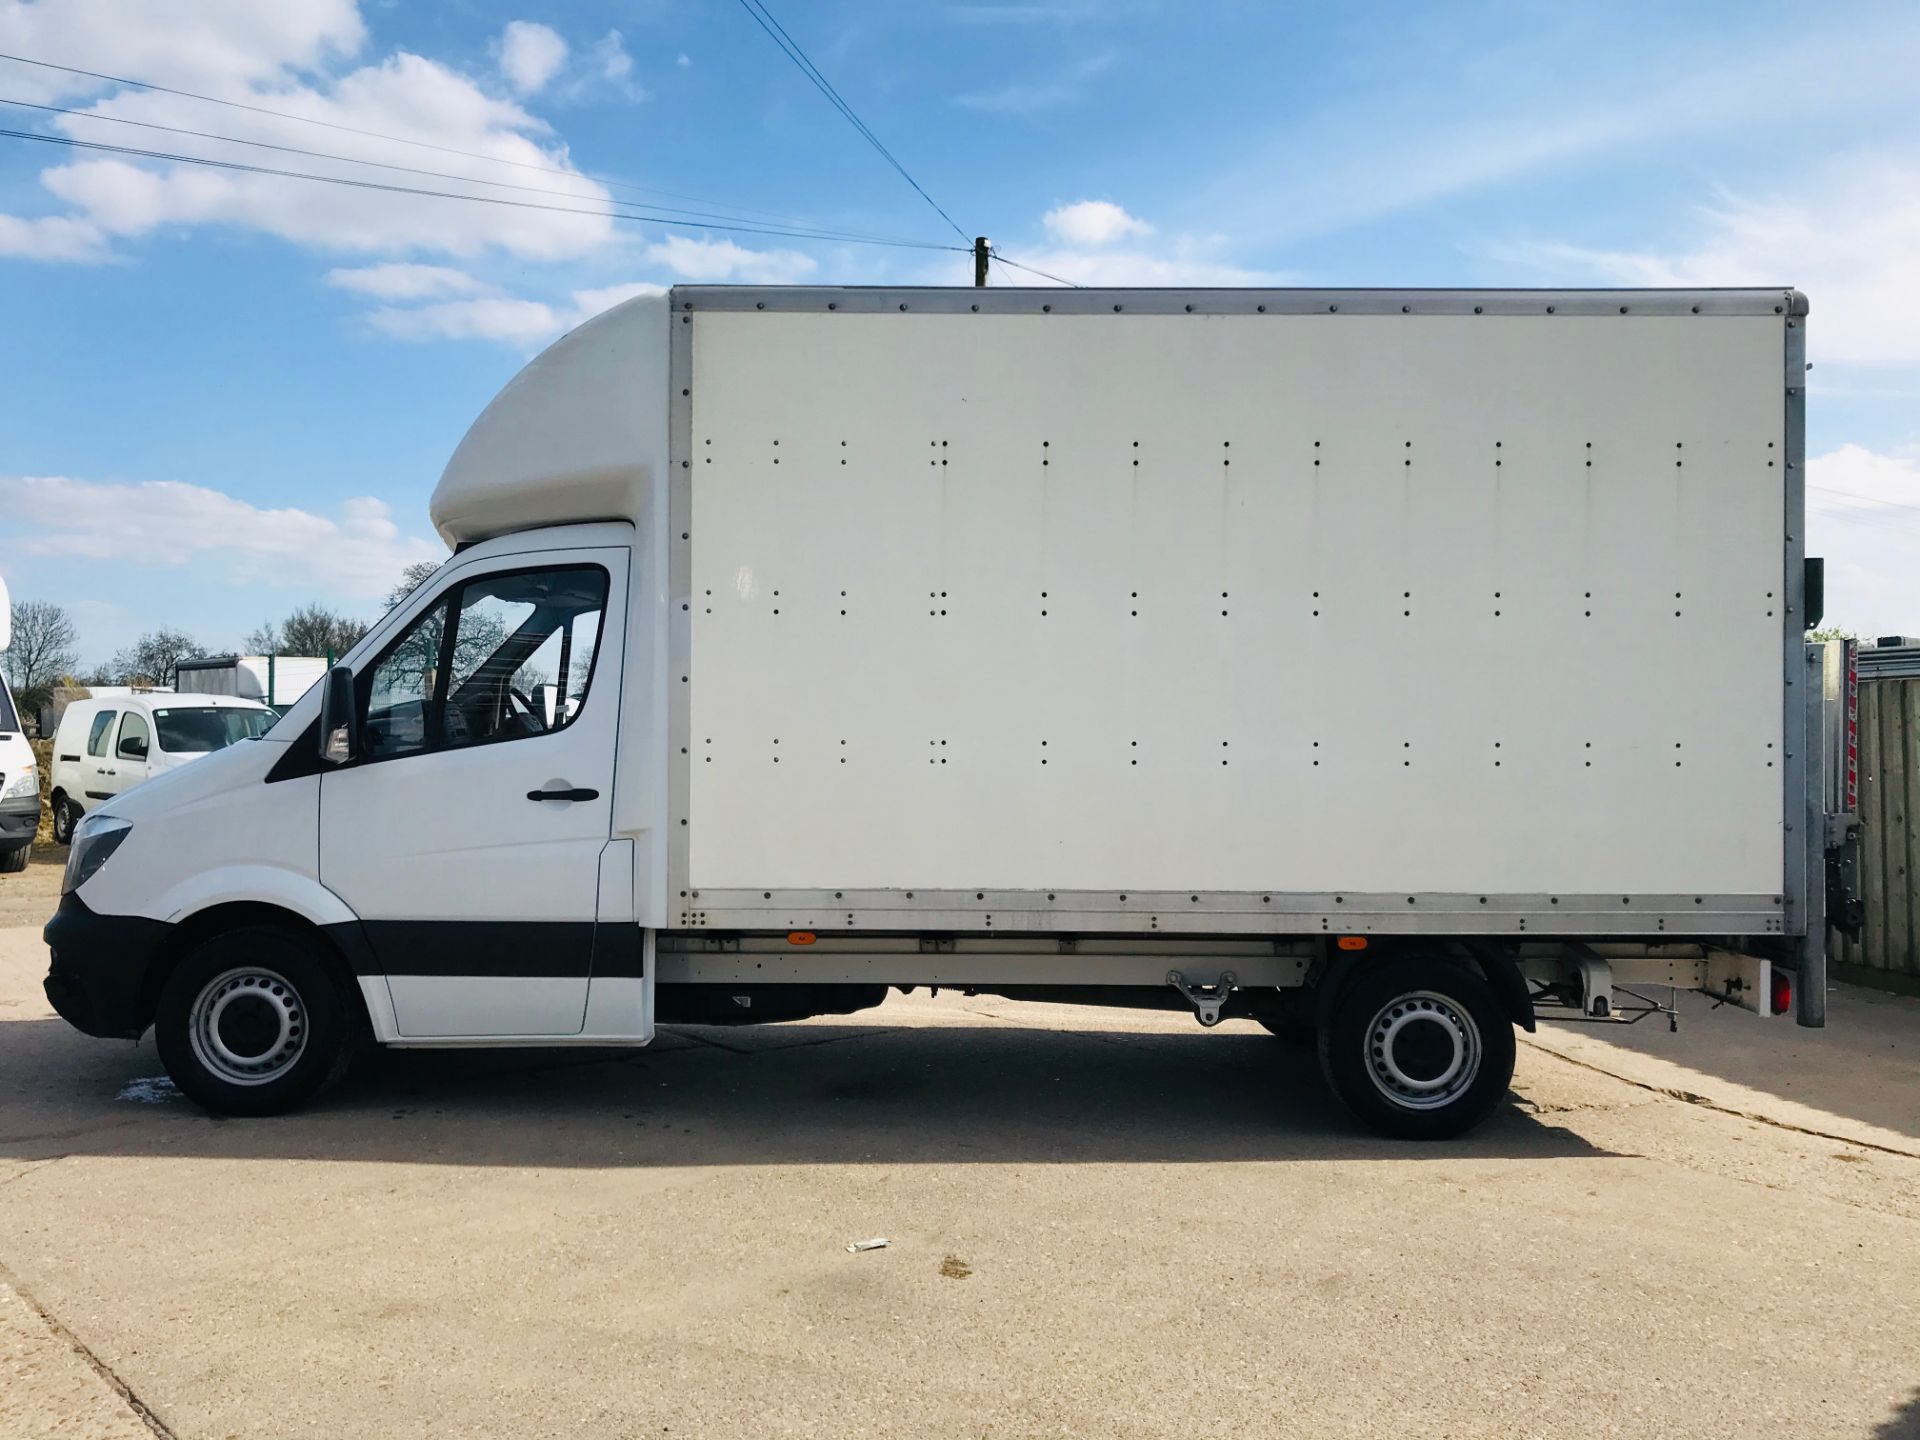 ON SALE MERCEDES SPRINTER 313CDI LWB 14FT LUTON BOX VAN WITH ELECTRIC TAIL LIFT (16 REG) 1 OWNER FSH - Image 8 of 19